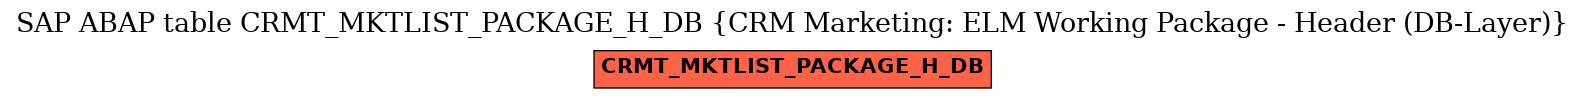 E-R Diagram for table CRMT_MKTLIST_PACKAGE_H_DB (CRM Marketing: ELM Working Package - Header (DB-Layer))